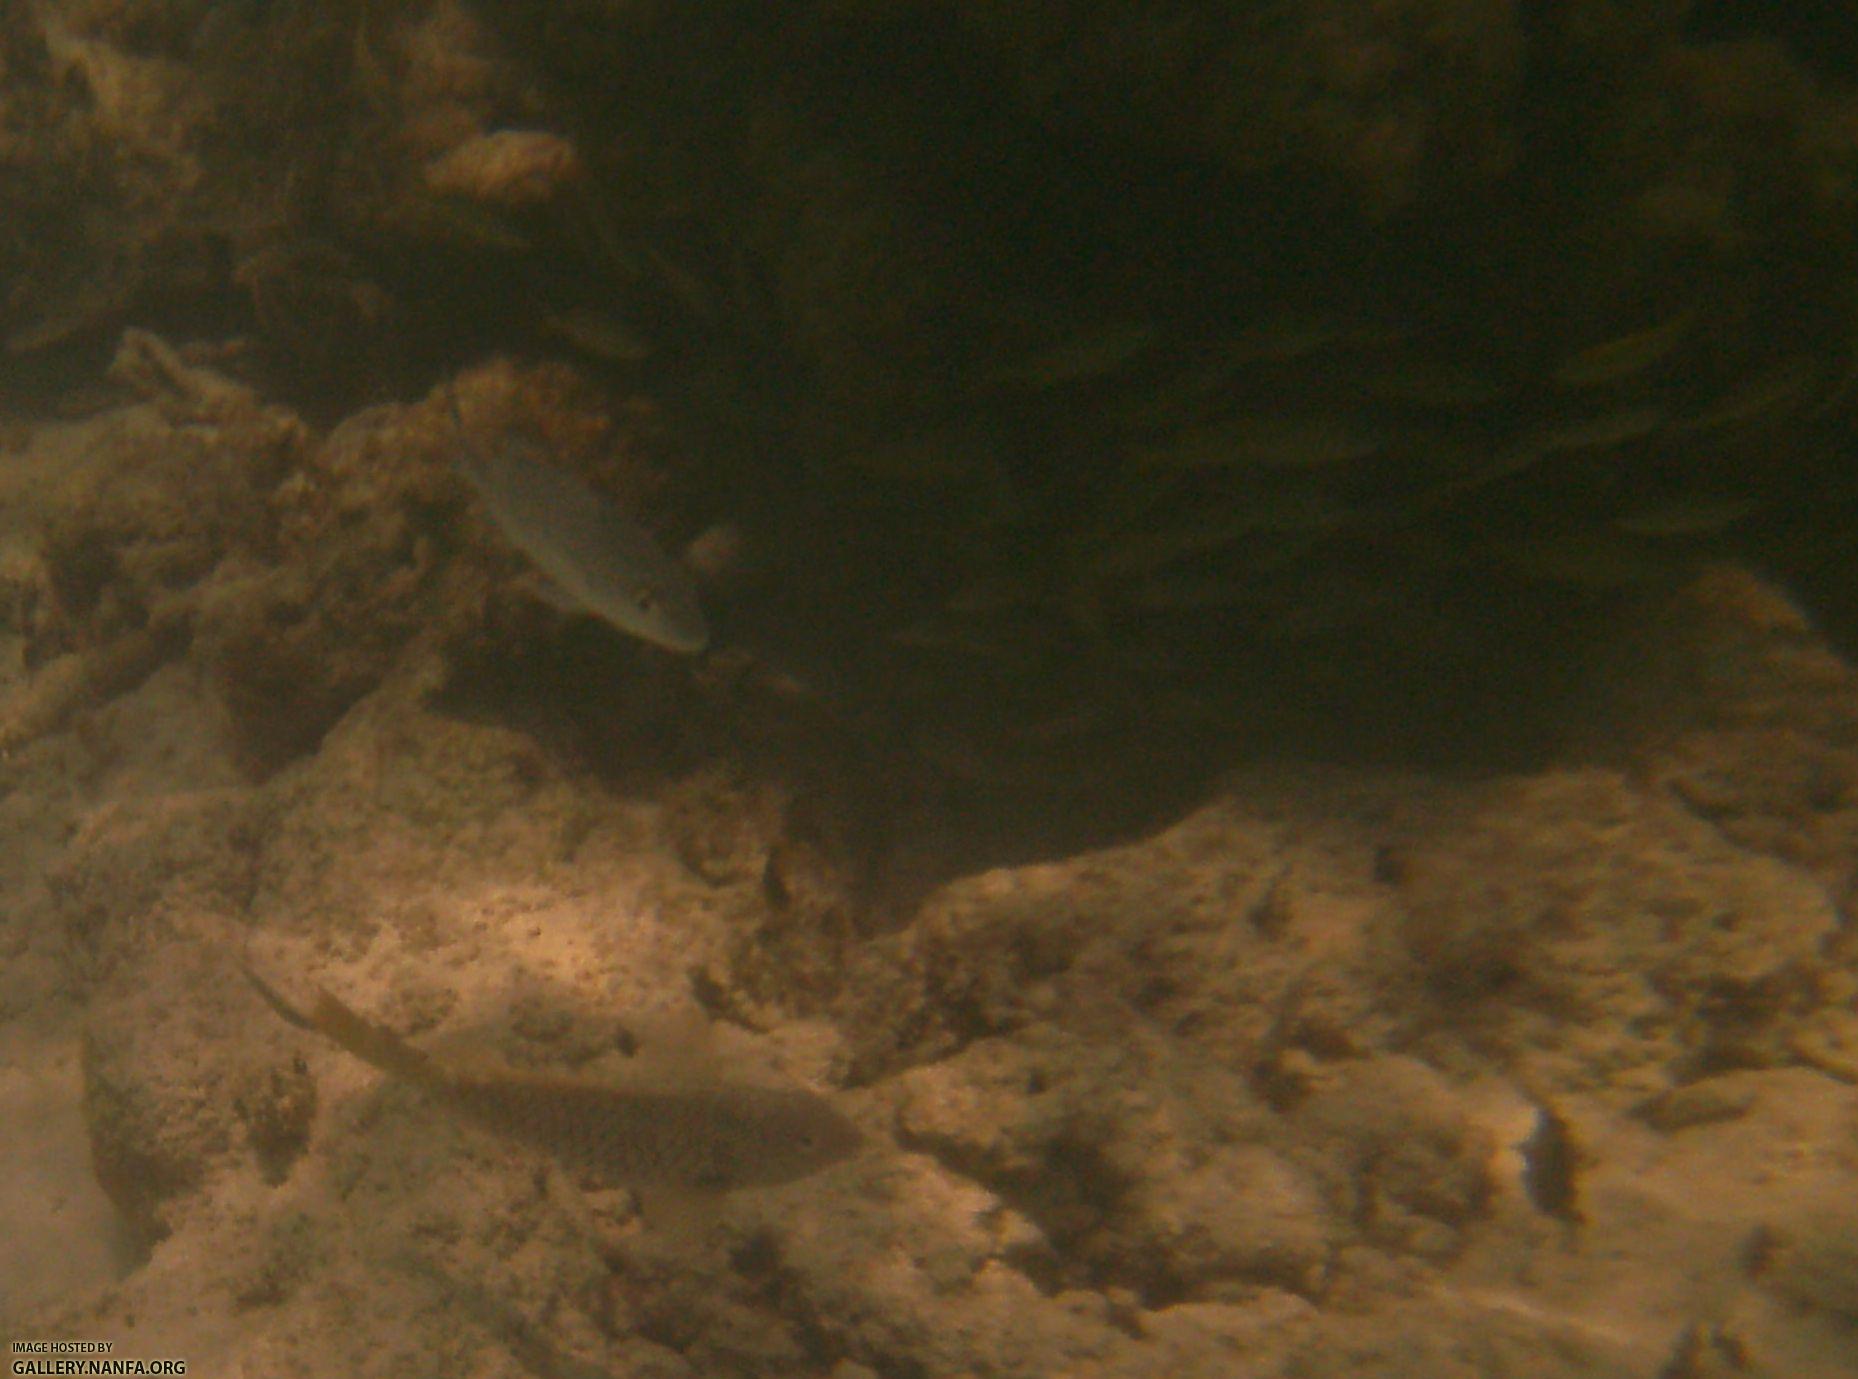 various small fish including grunts